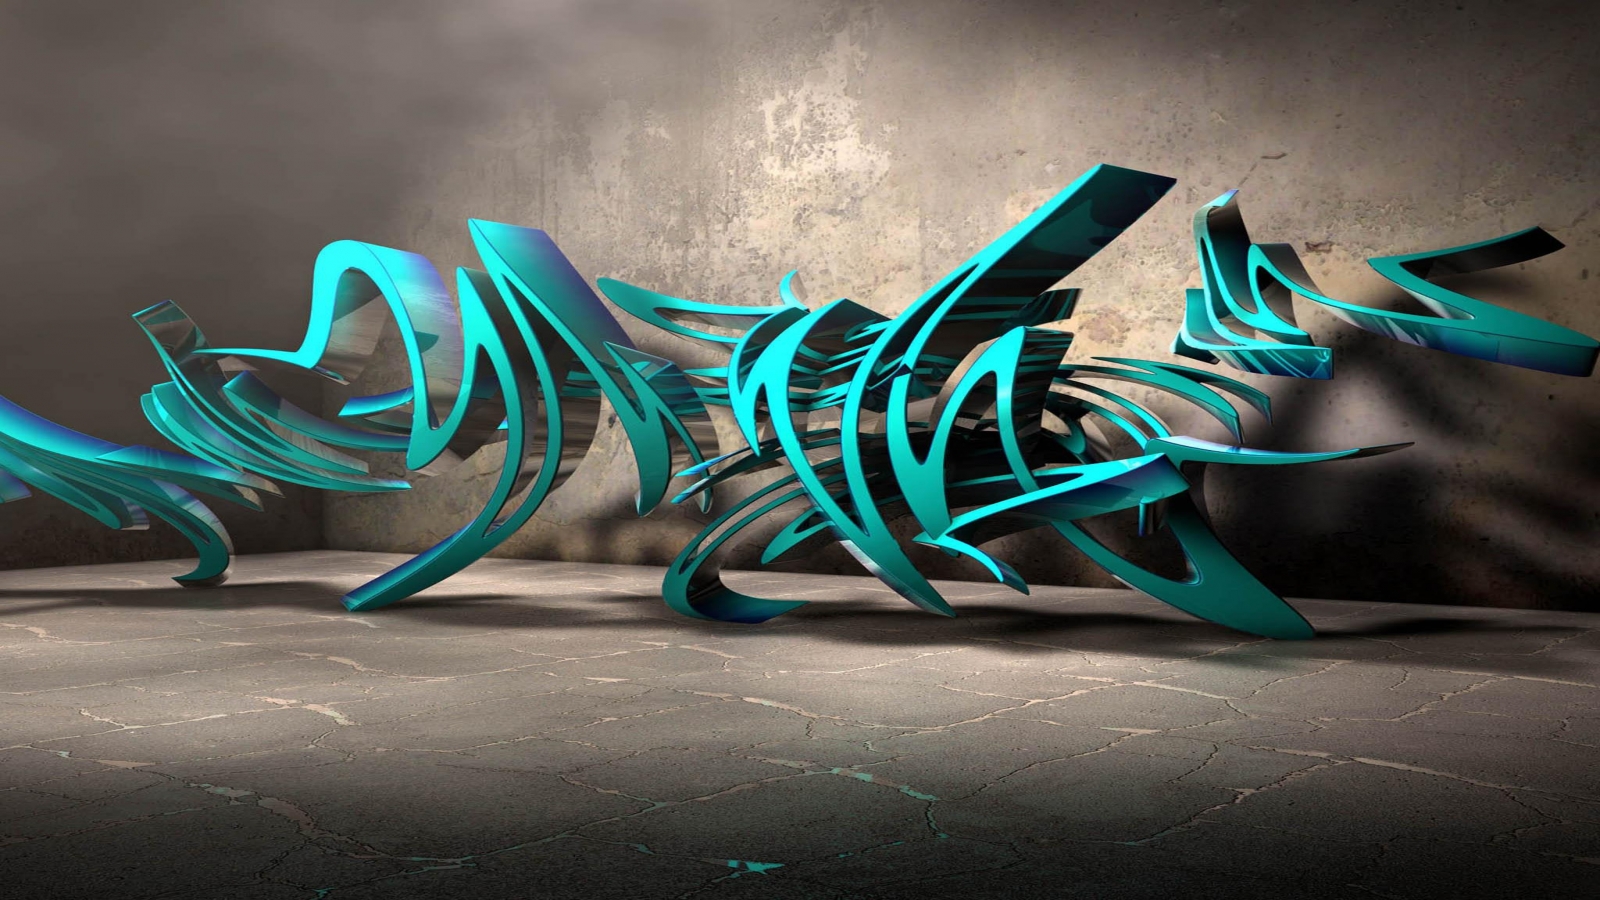 3D Graffiti Wallpapers Wallpaper Area Image source from this 1600x900